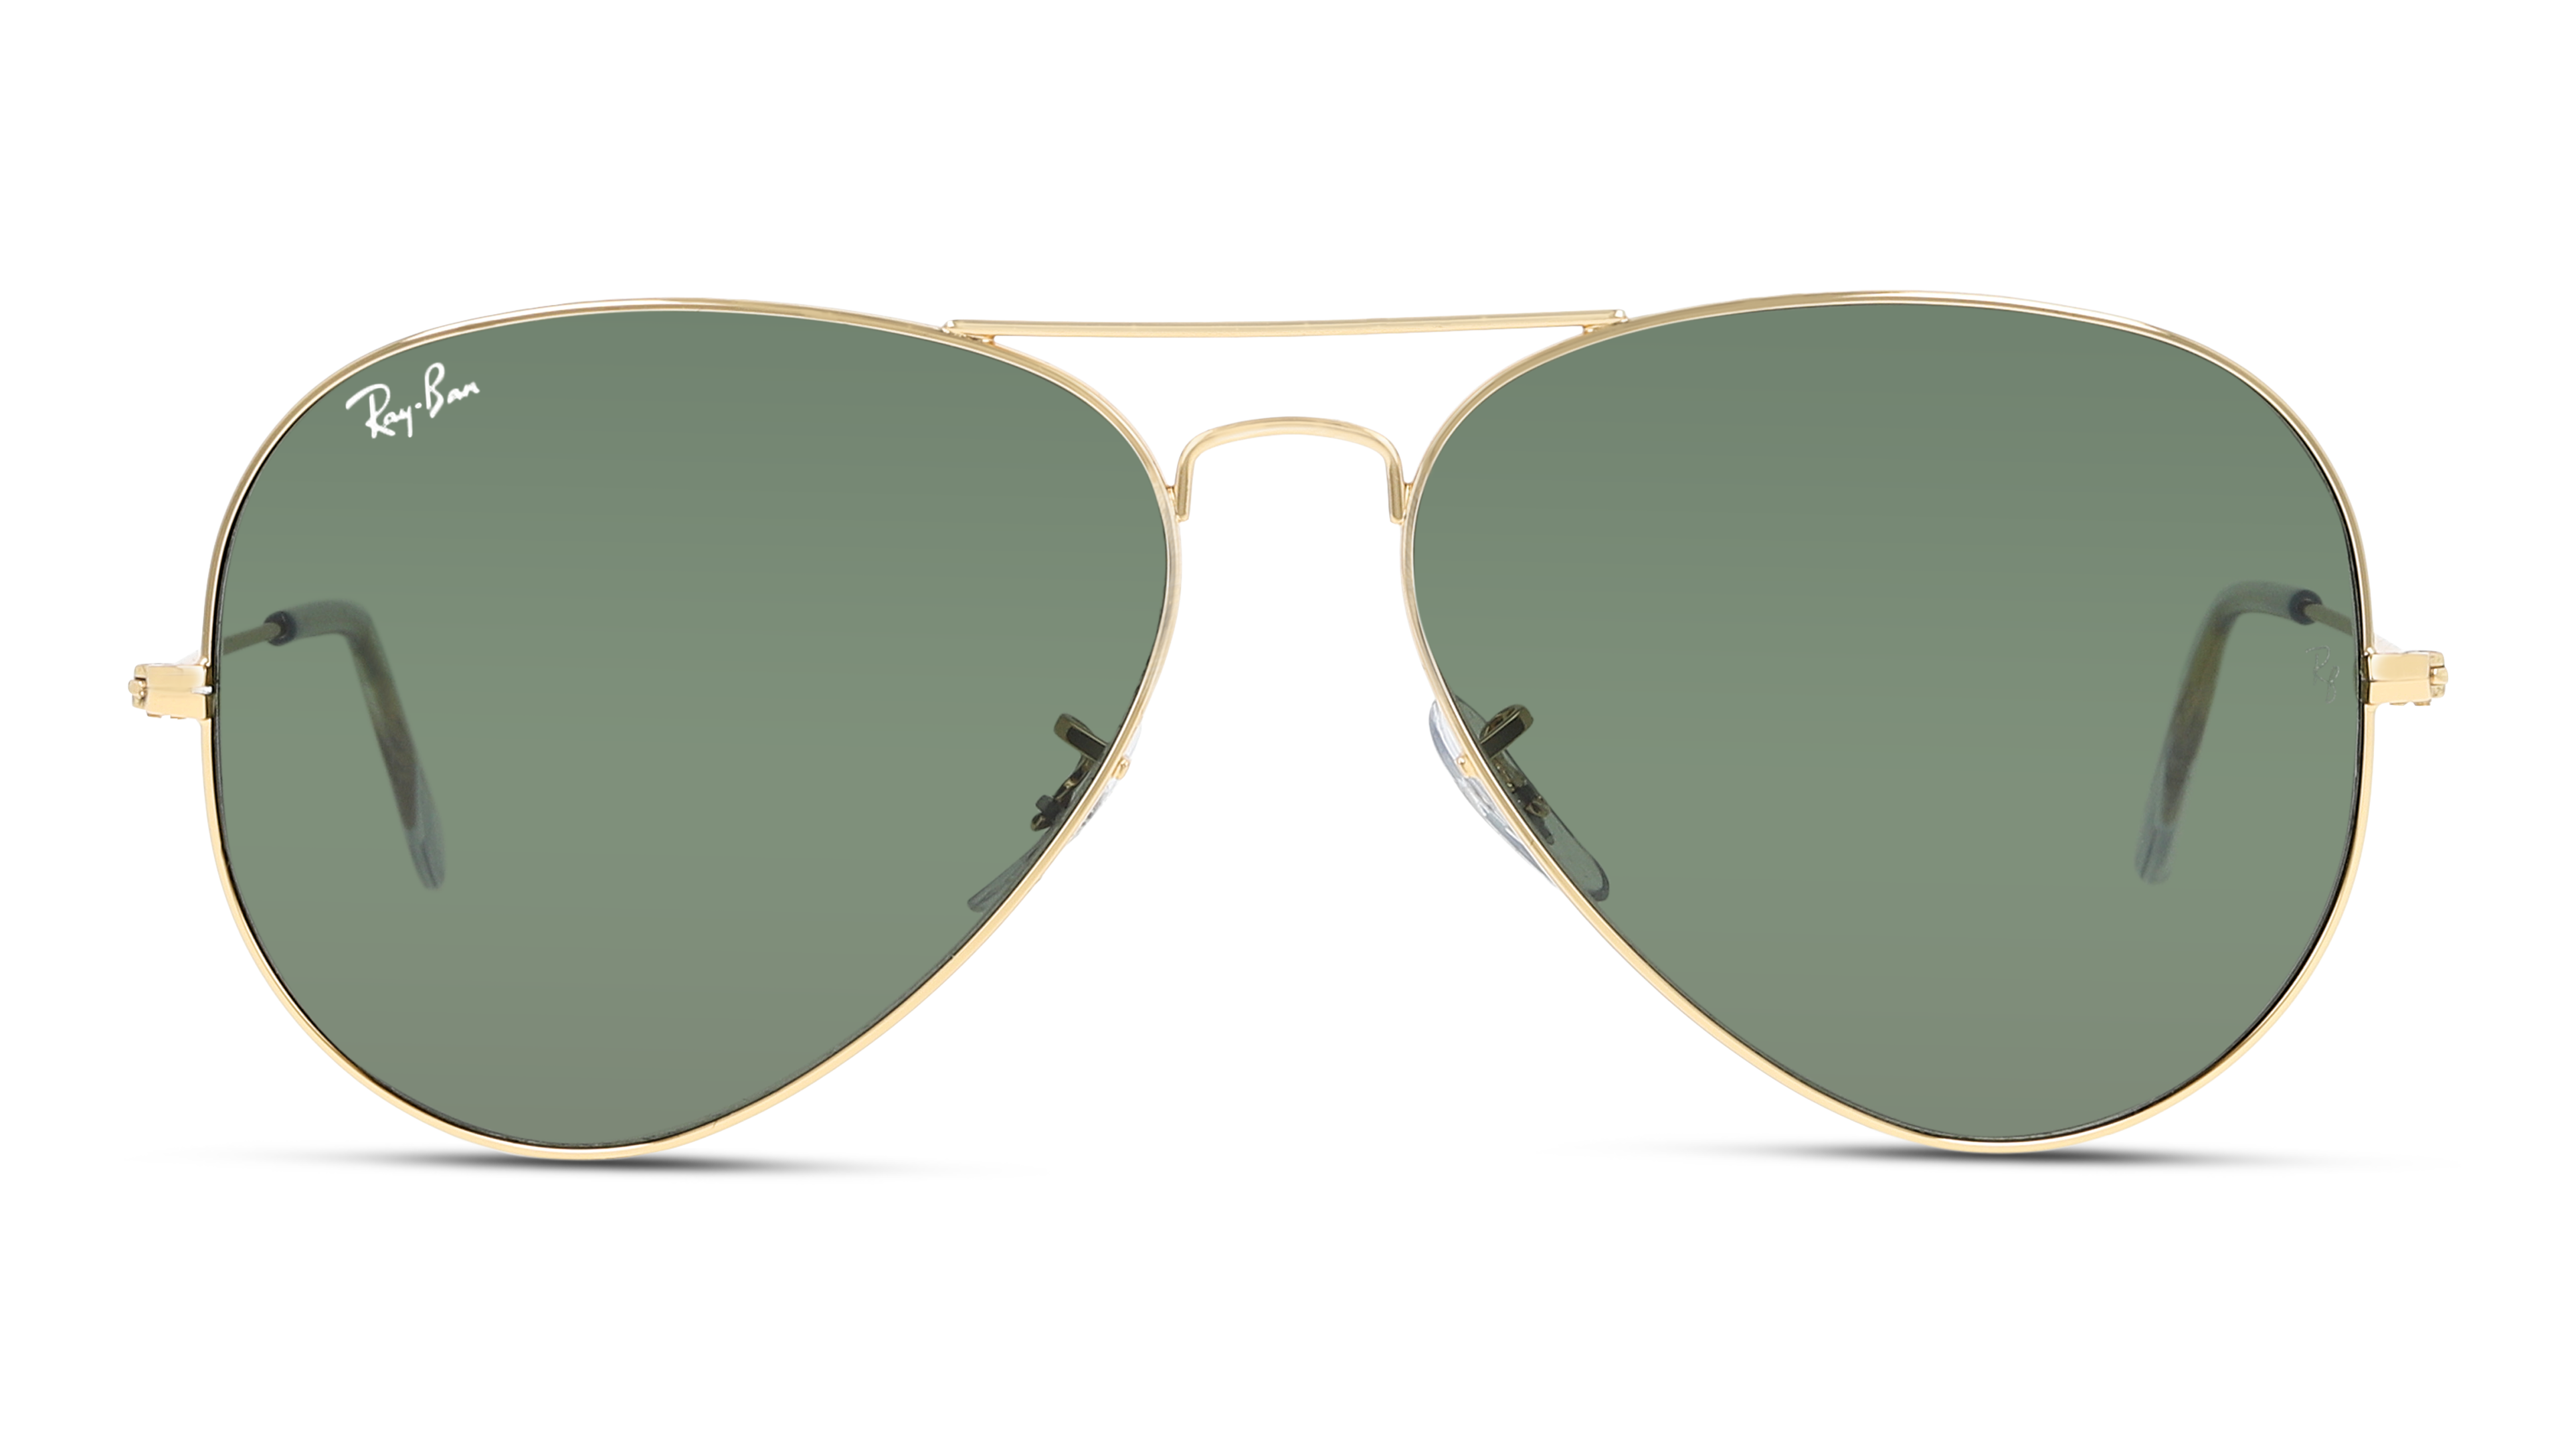 [products.image.front] Ray-Ban Aviator Gradient RB3025 001